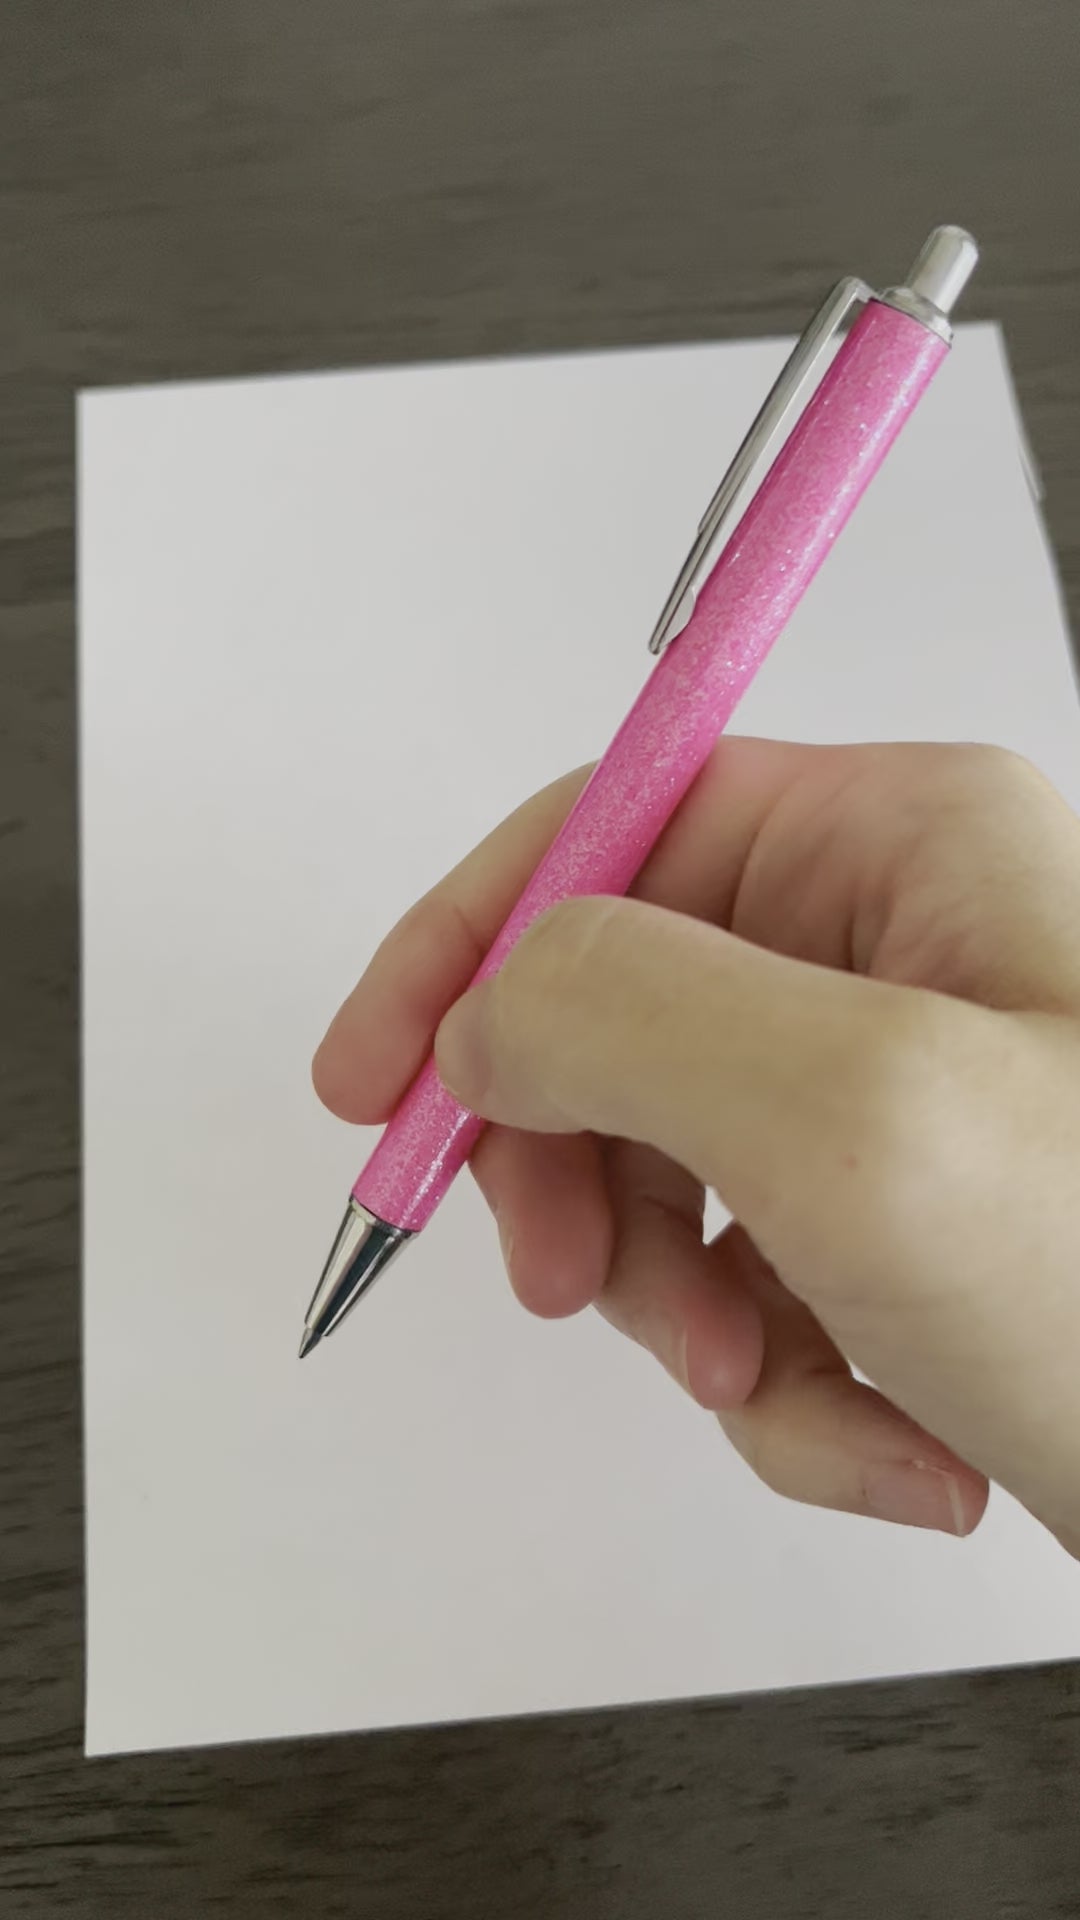 Video of the pink metal glitter body pen being shown writing. 